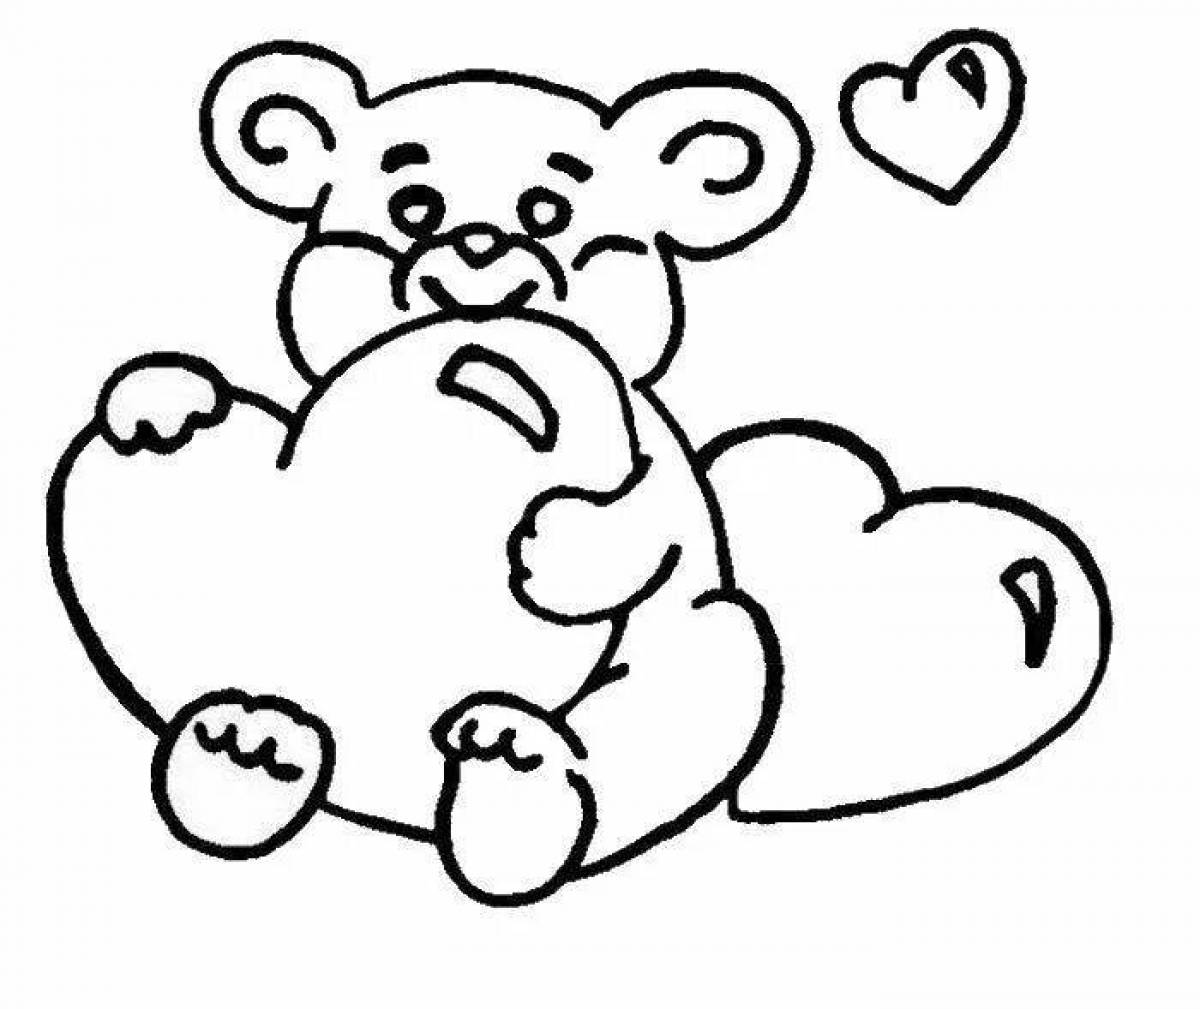 Coloring page gentle teddy bear with a heart